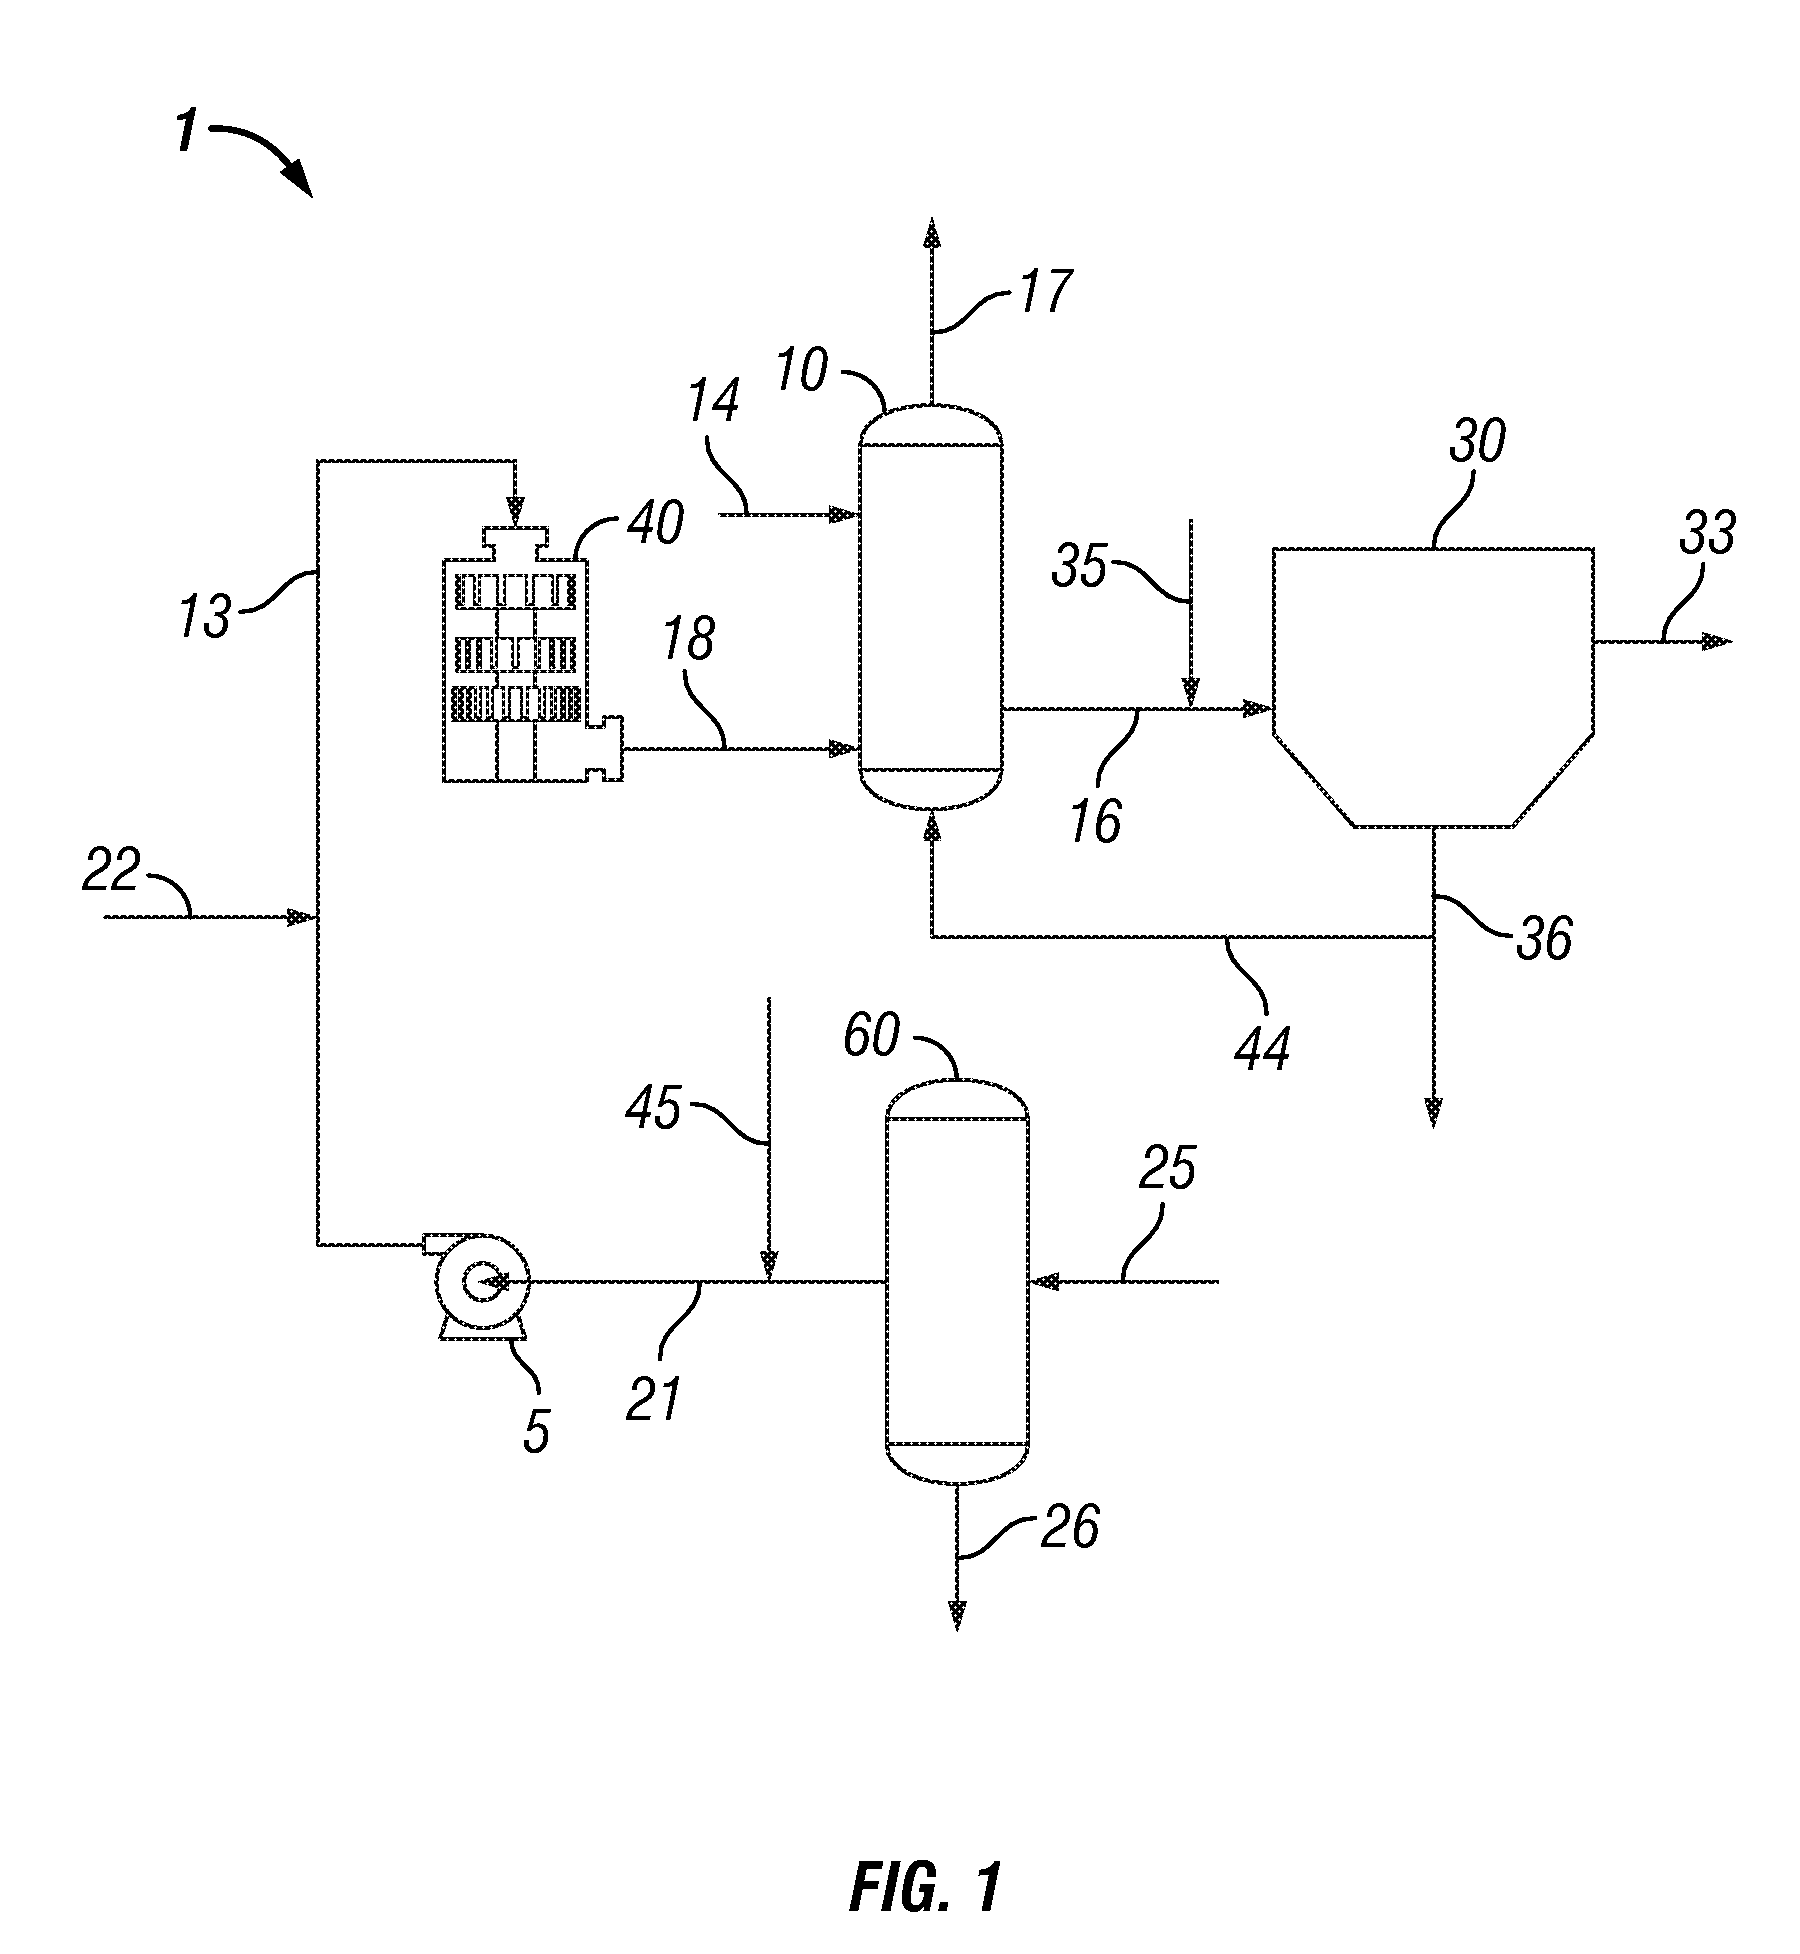 System and process for water treatment